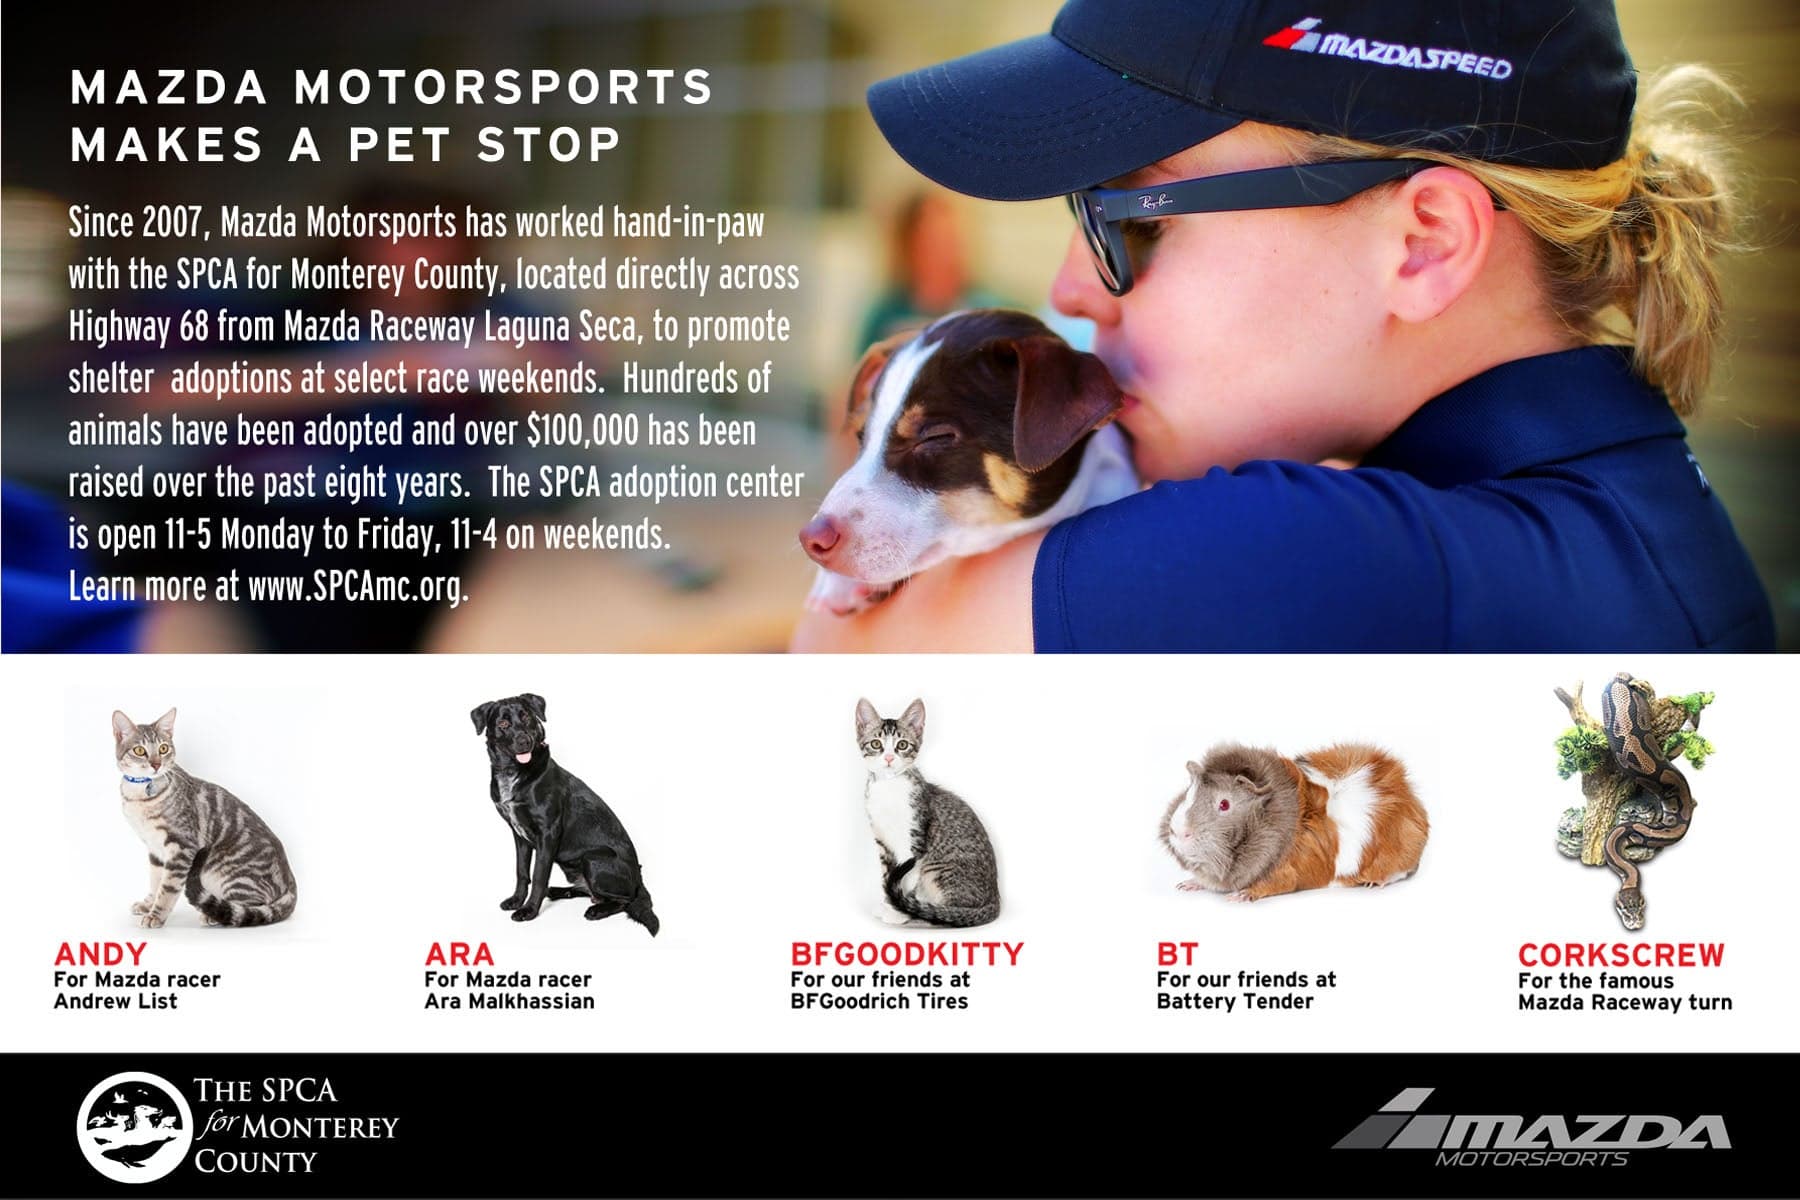 This Story Has Pictures of Puppies (and Mazdas)